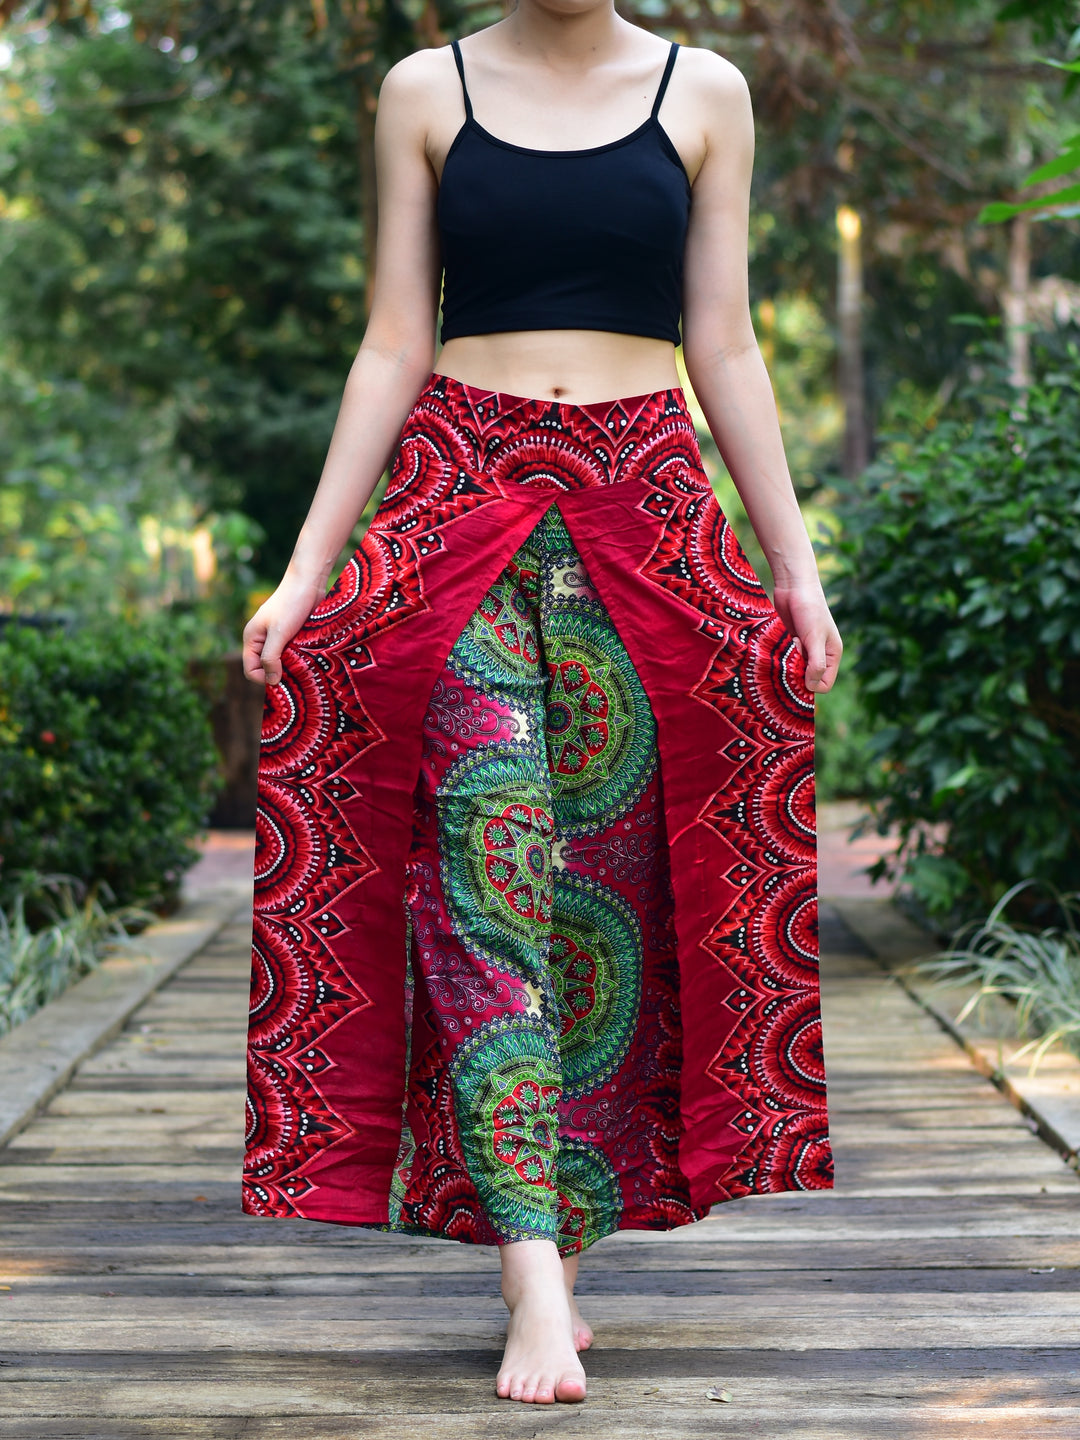 Bohotusk Green Red Divine Womens Palazzo Trousers S/M to L/XL